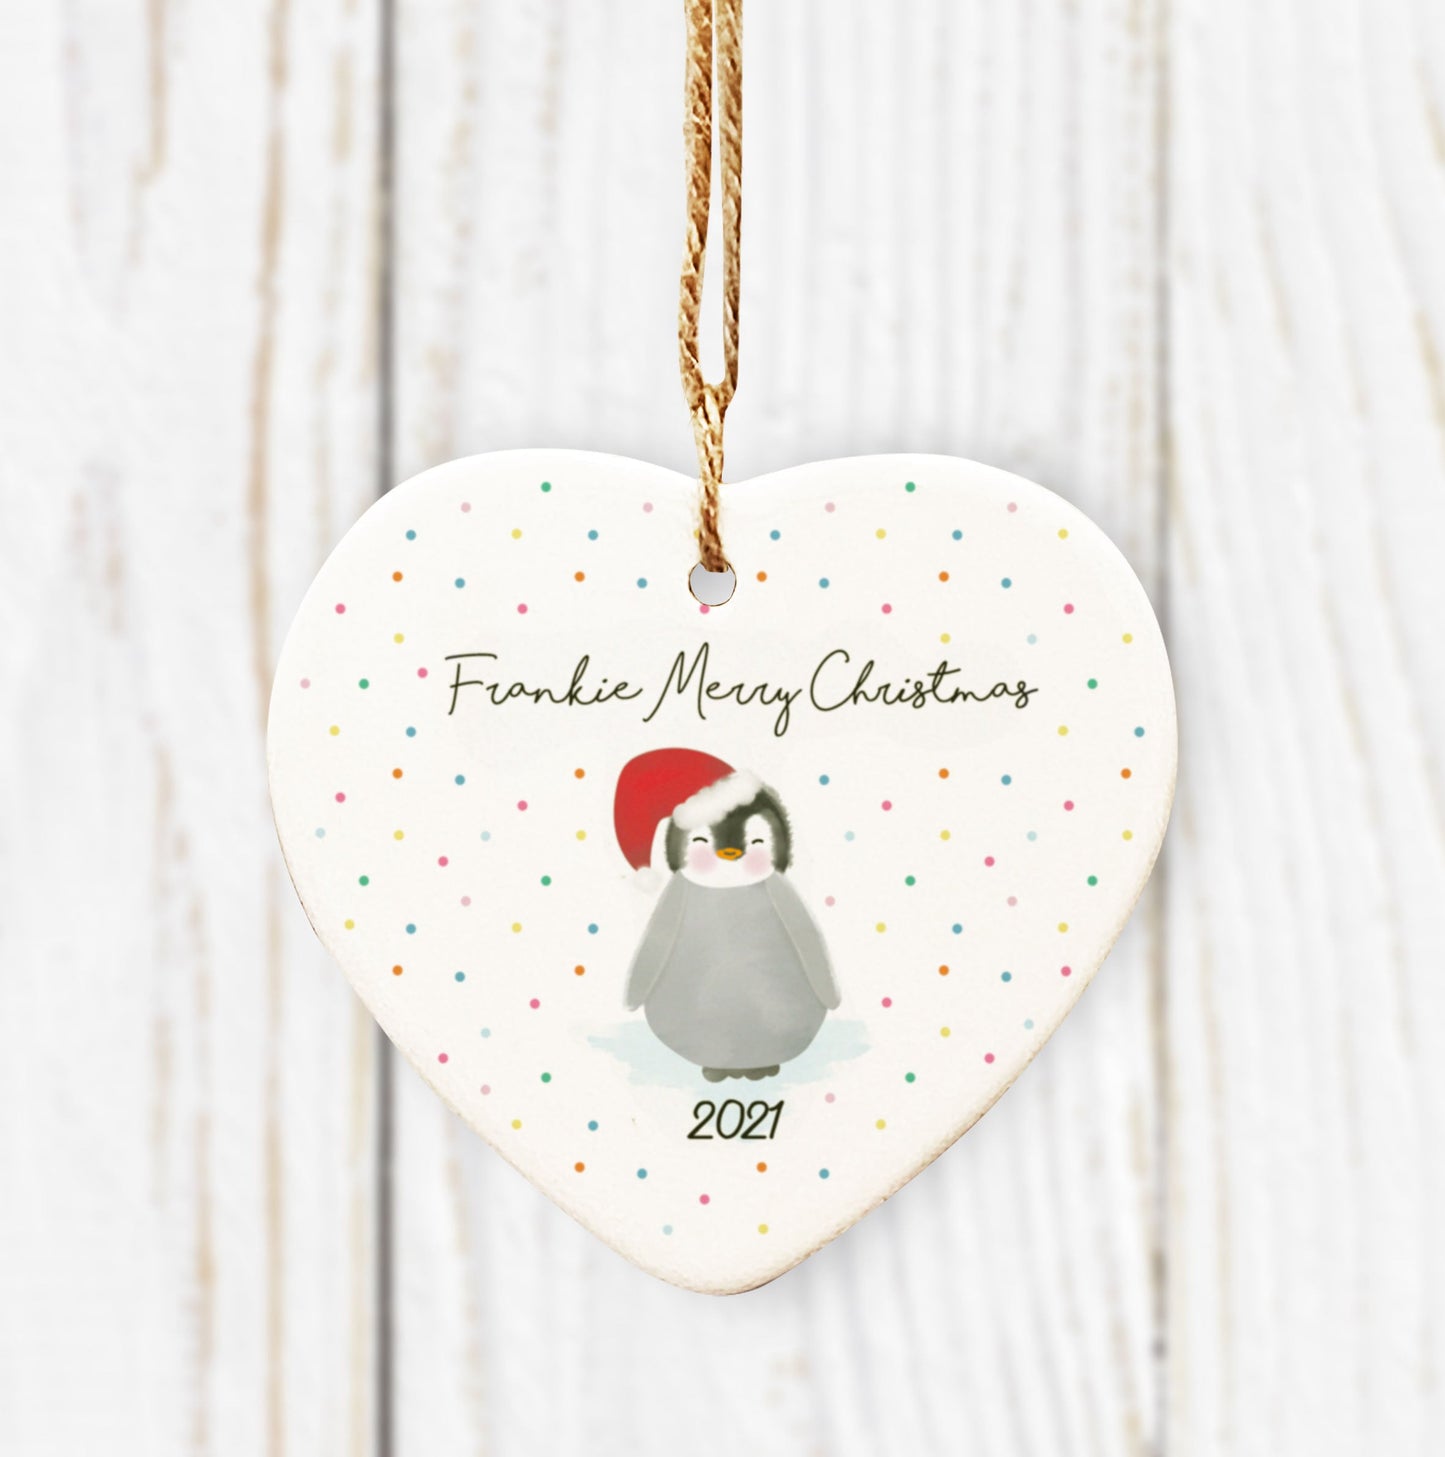 Personalised My First Christmas / Merry Christmas Hanging Ceramic Heart. Cute Penguin Decoration. New Baby Gift. Baby's First Christmas.